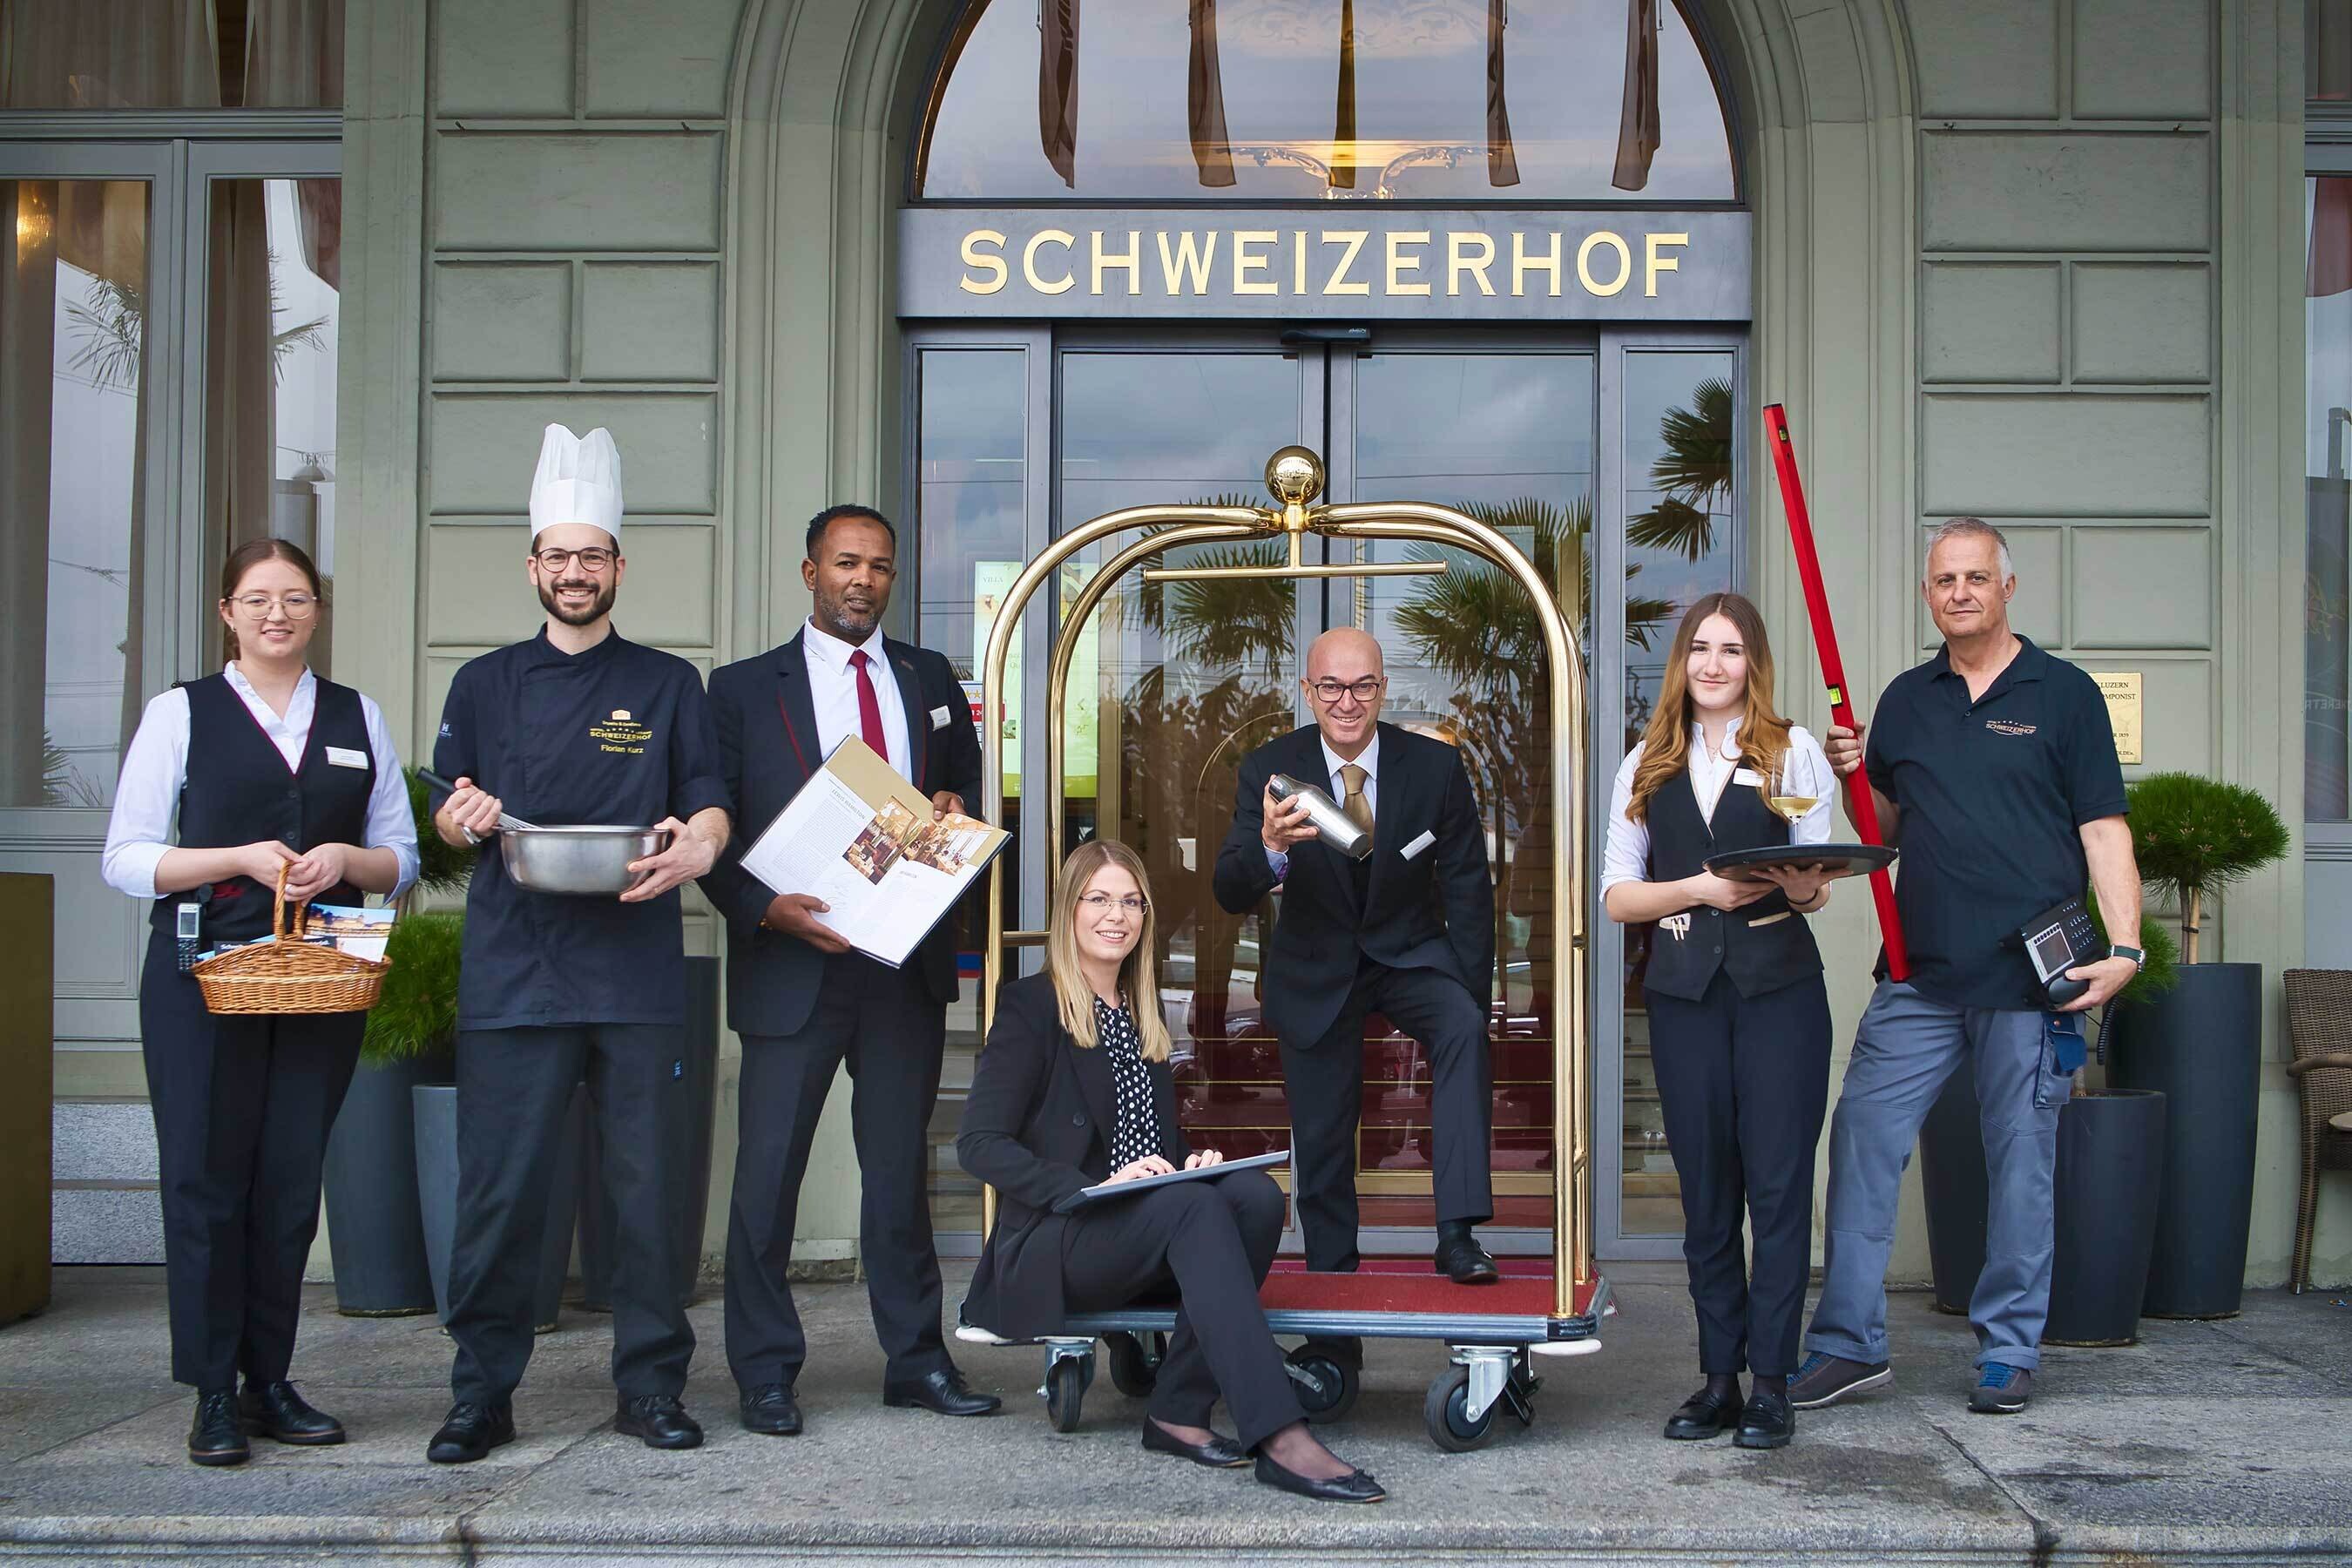 <p>Working at the Hotel Schweizerhof,<br
/>in the heart of Lucerne</p>